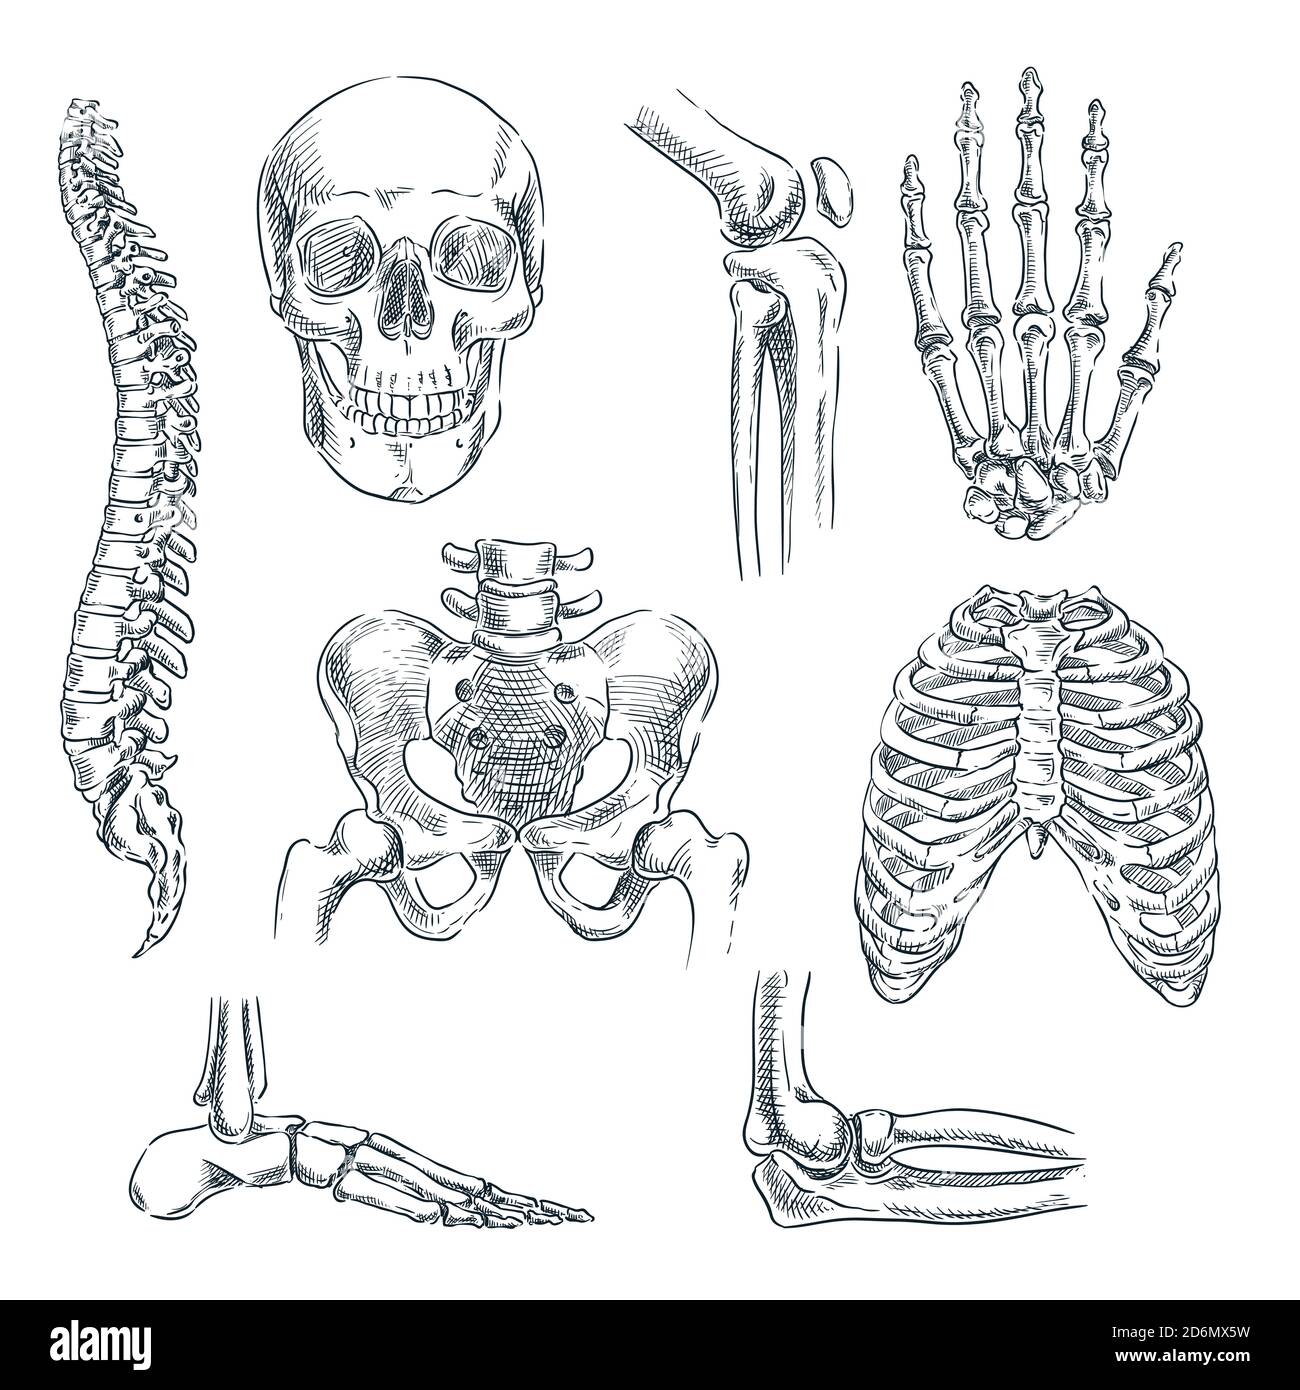 Human Skeleton Bones And Joints Vector Sketch Isolated Illustration